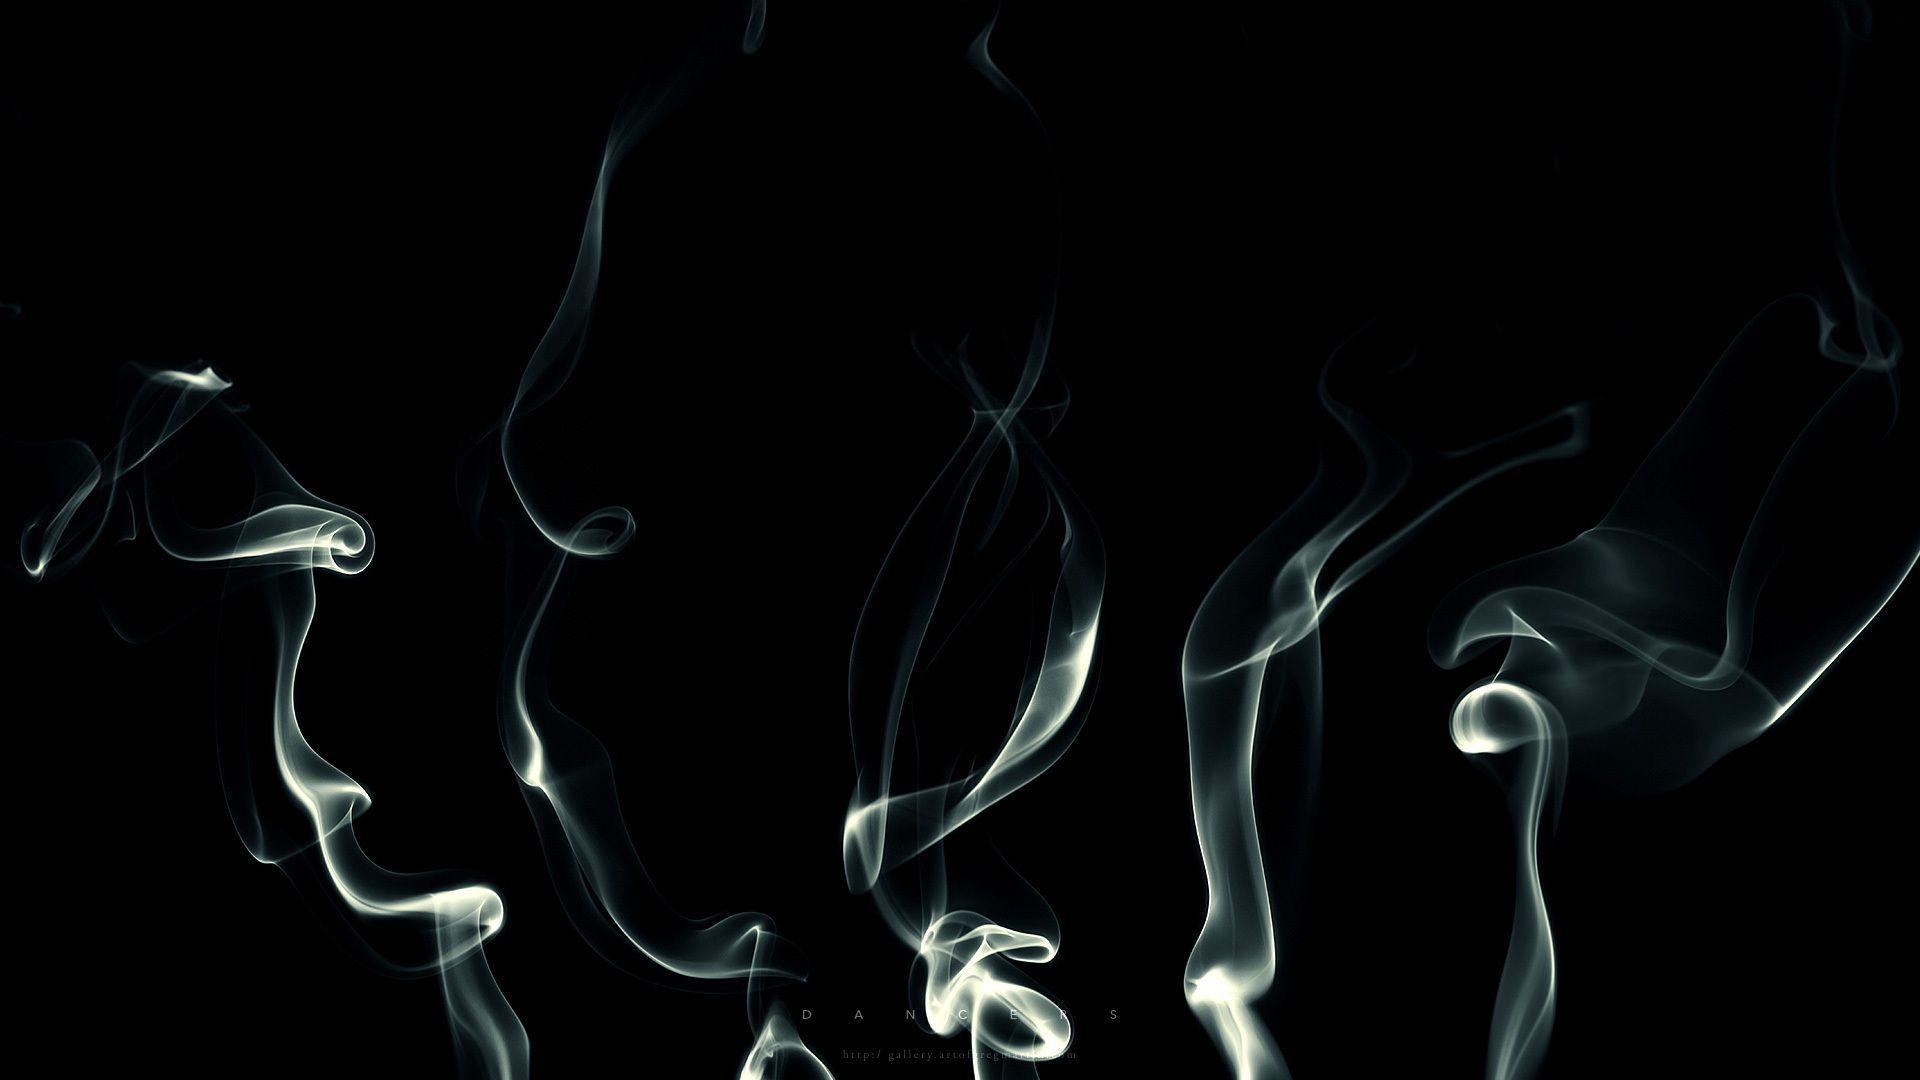 image For > Smoking Wallpaper Of Cigarette